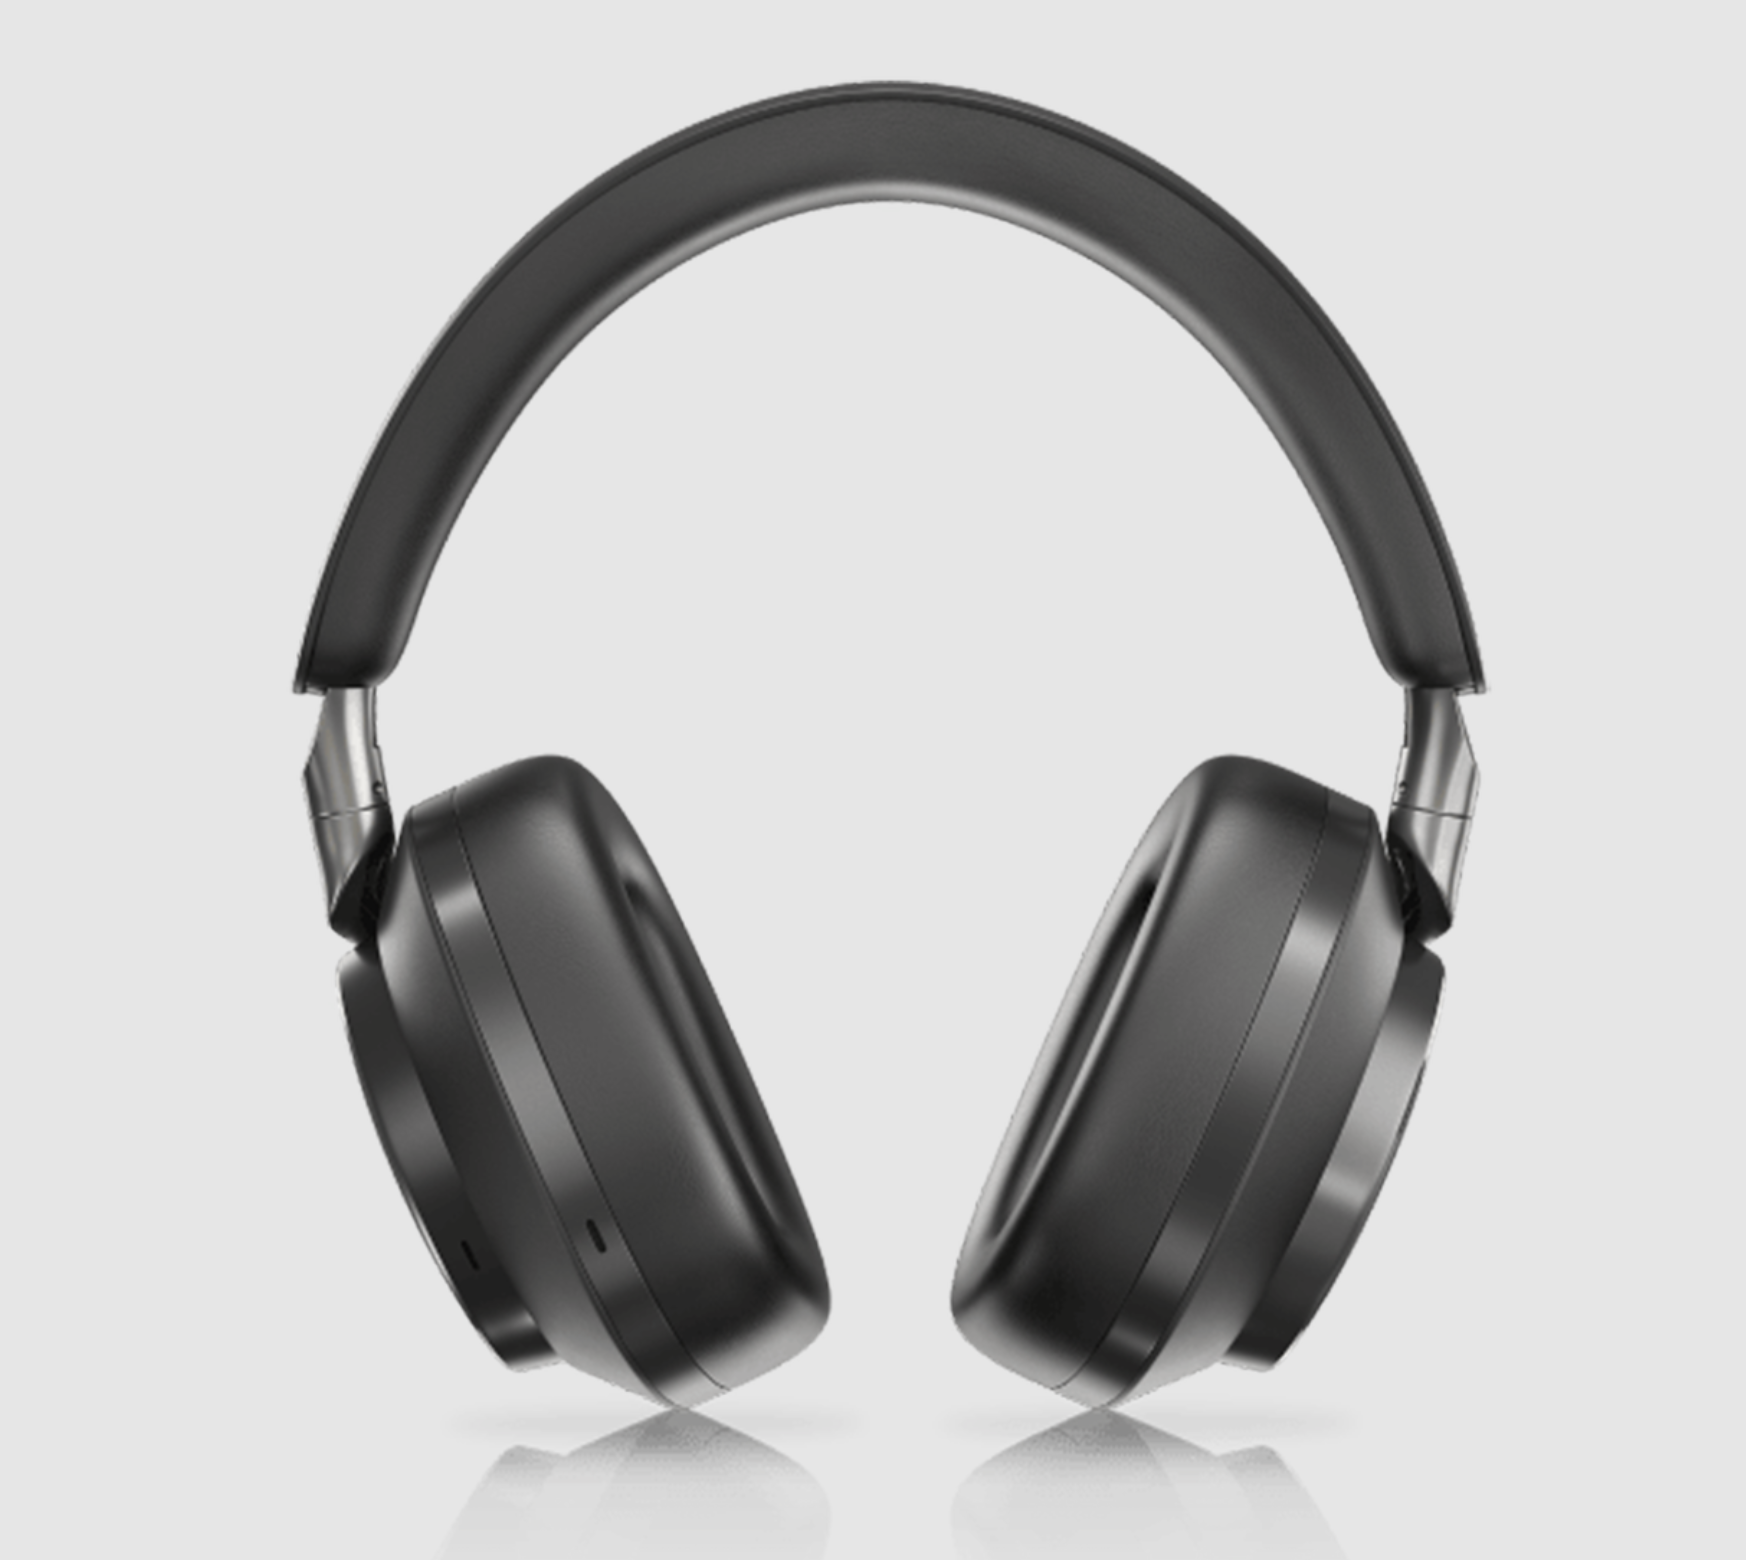 B&W Px8 Noise Cancelling Headphones in Back. Image of front